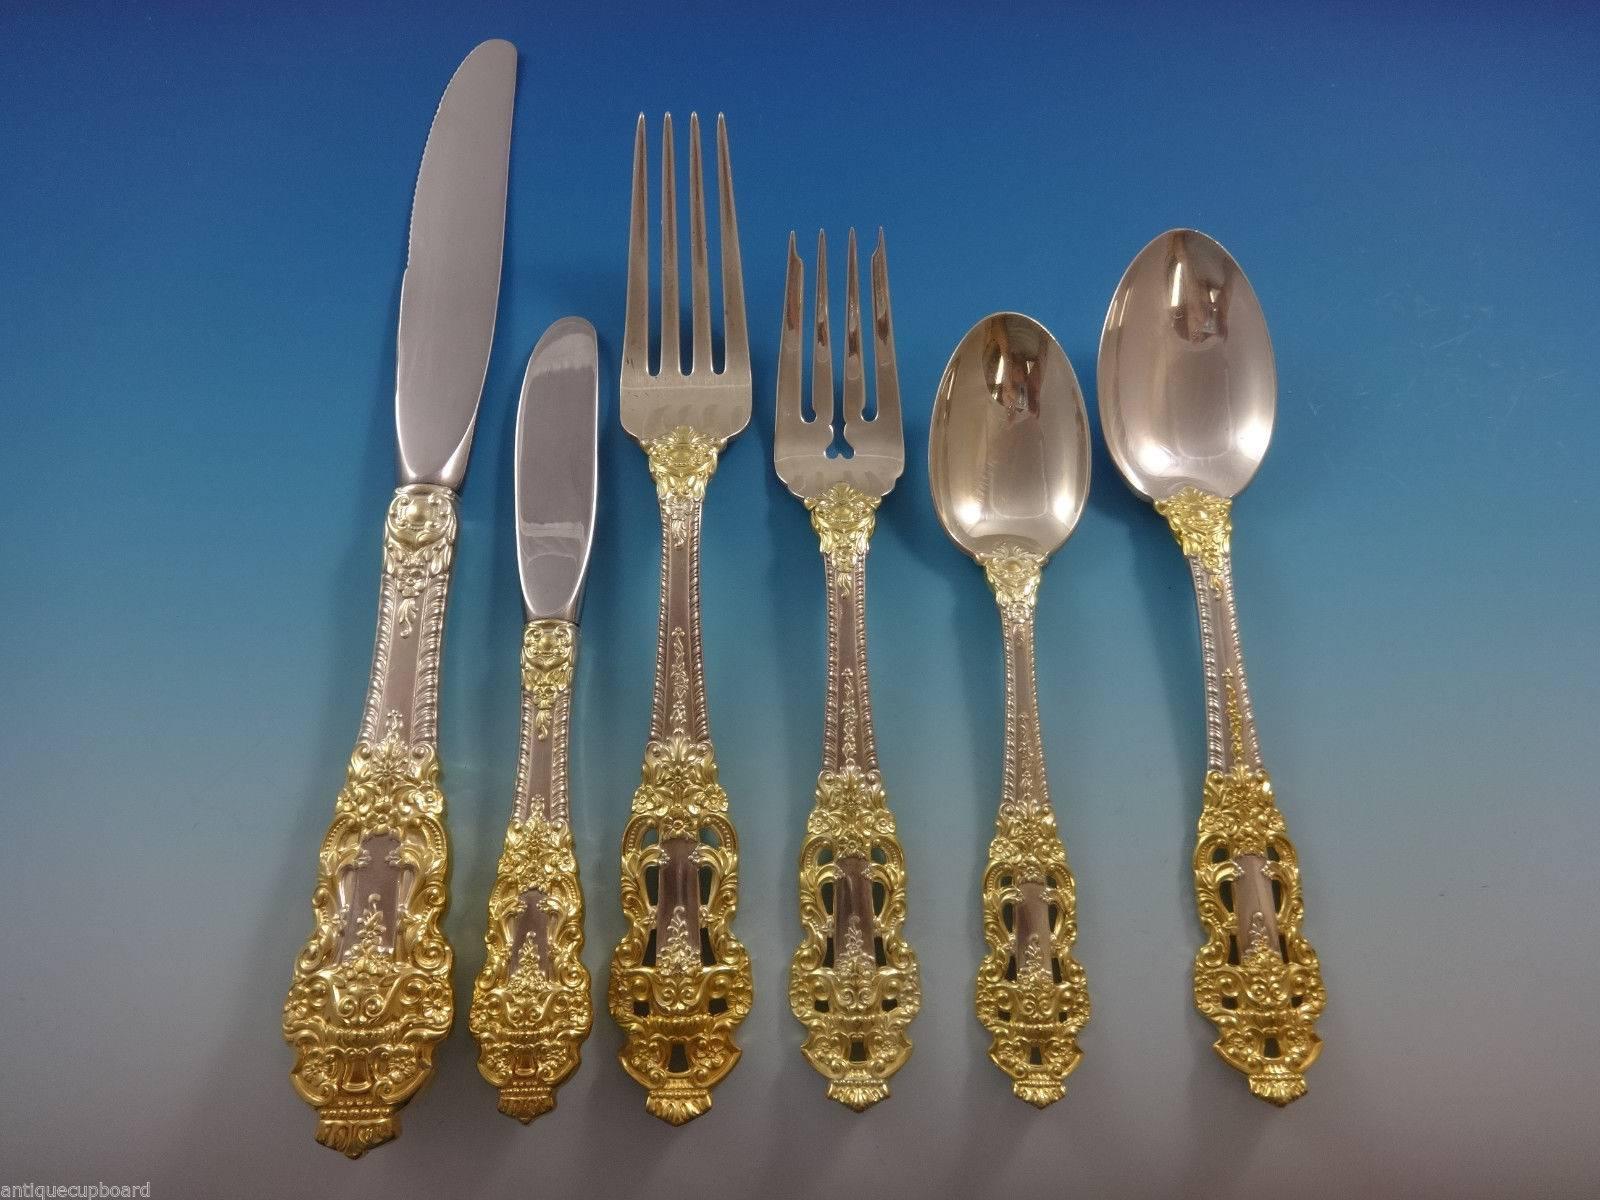 Exceptional DINNER SIZE GOLDEN CROWN BAROQUE BY GORHAM sterling silver DINNER SIZE Flatware set - 74 pieces. THIS SET WONDERFULLY HEAVY & IMPRESSIVE! 

This set includes:

•12 DINNER SIZE KNIVES, SERRATED, 9 7/8